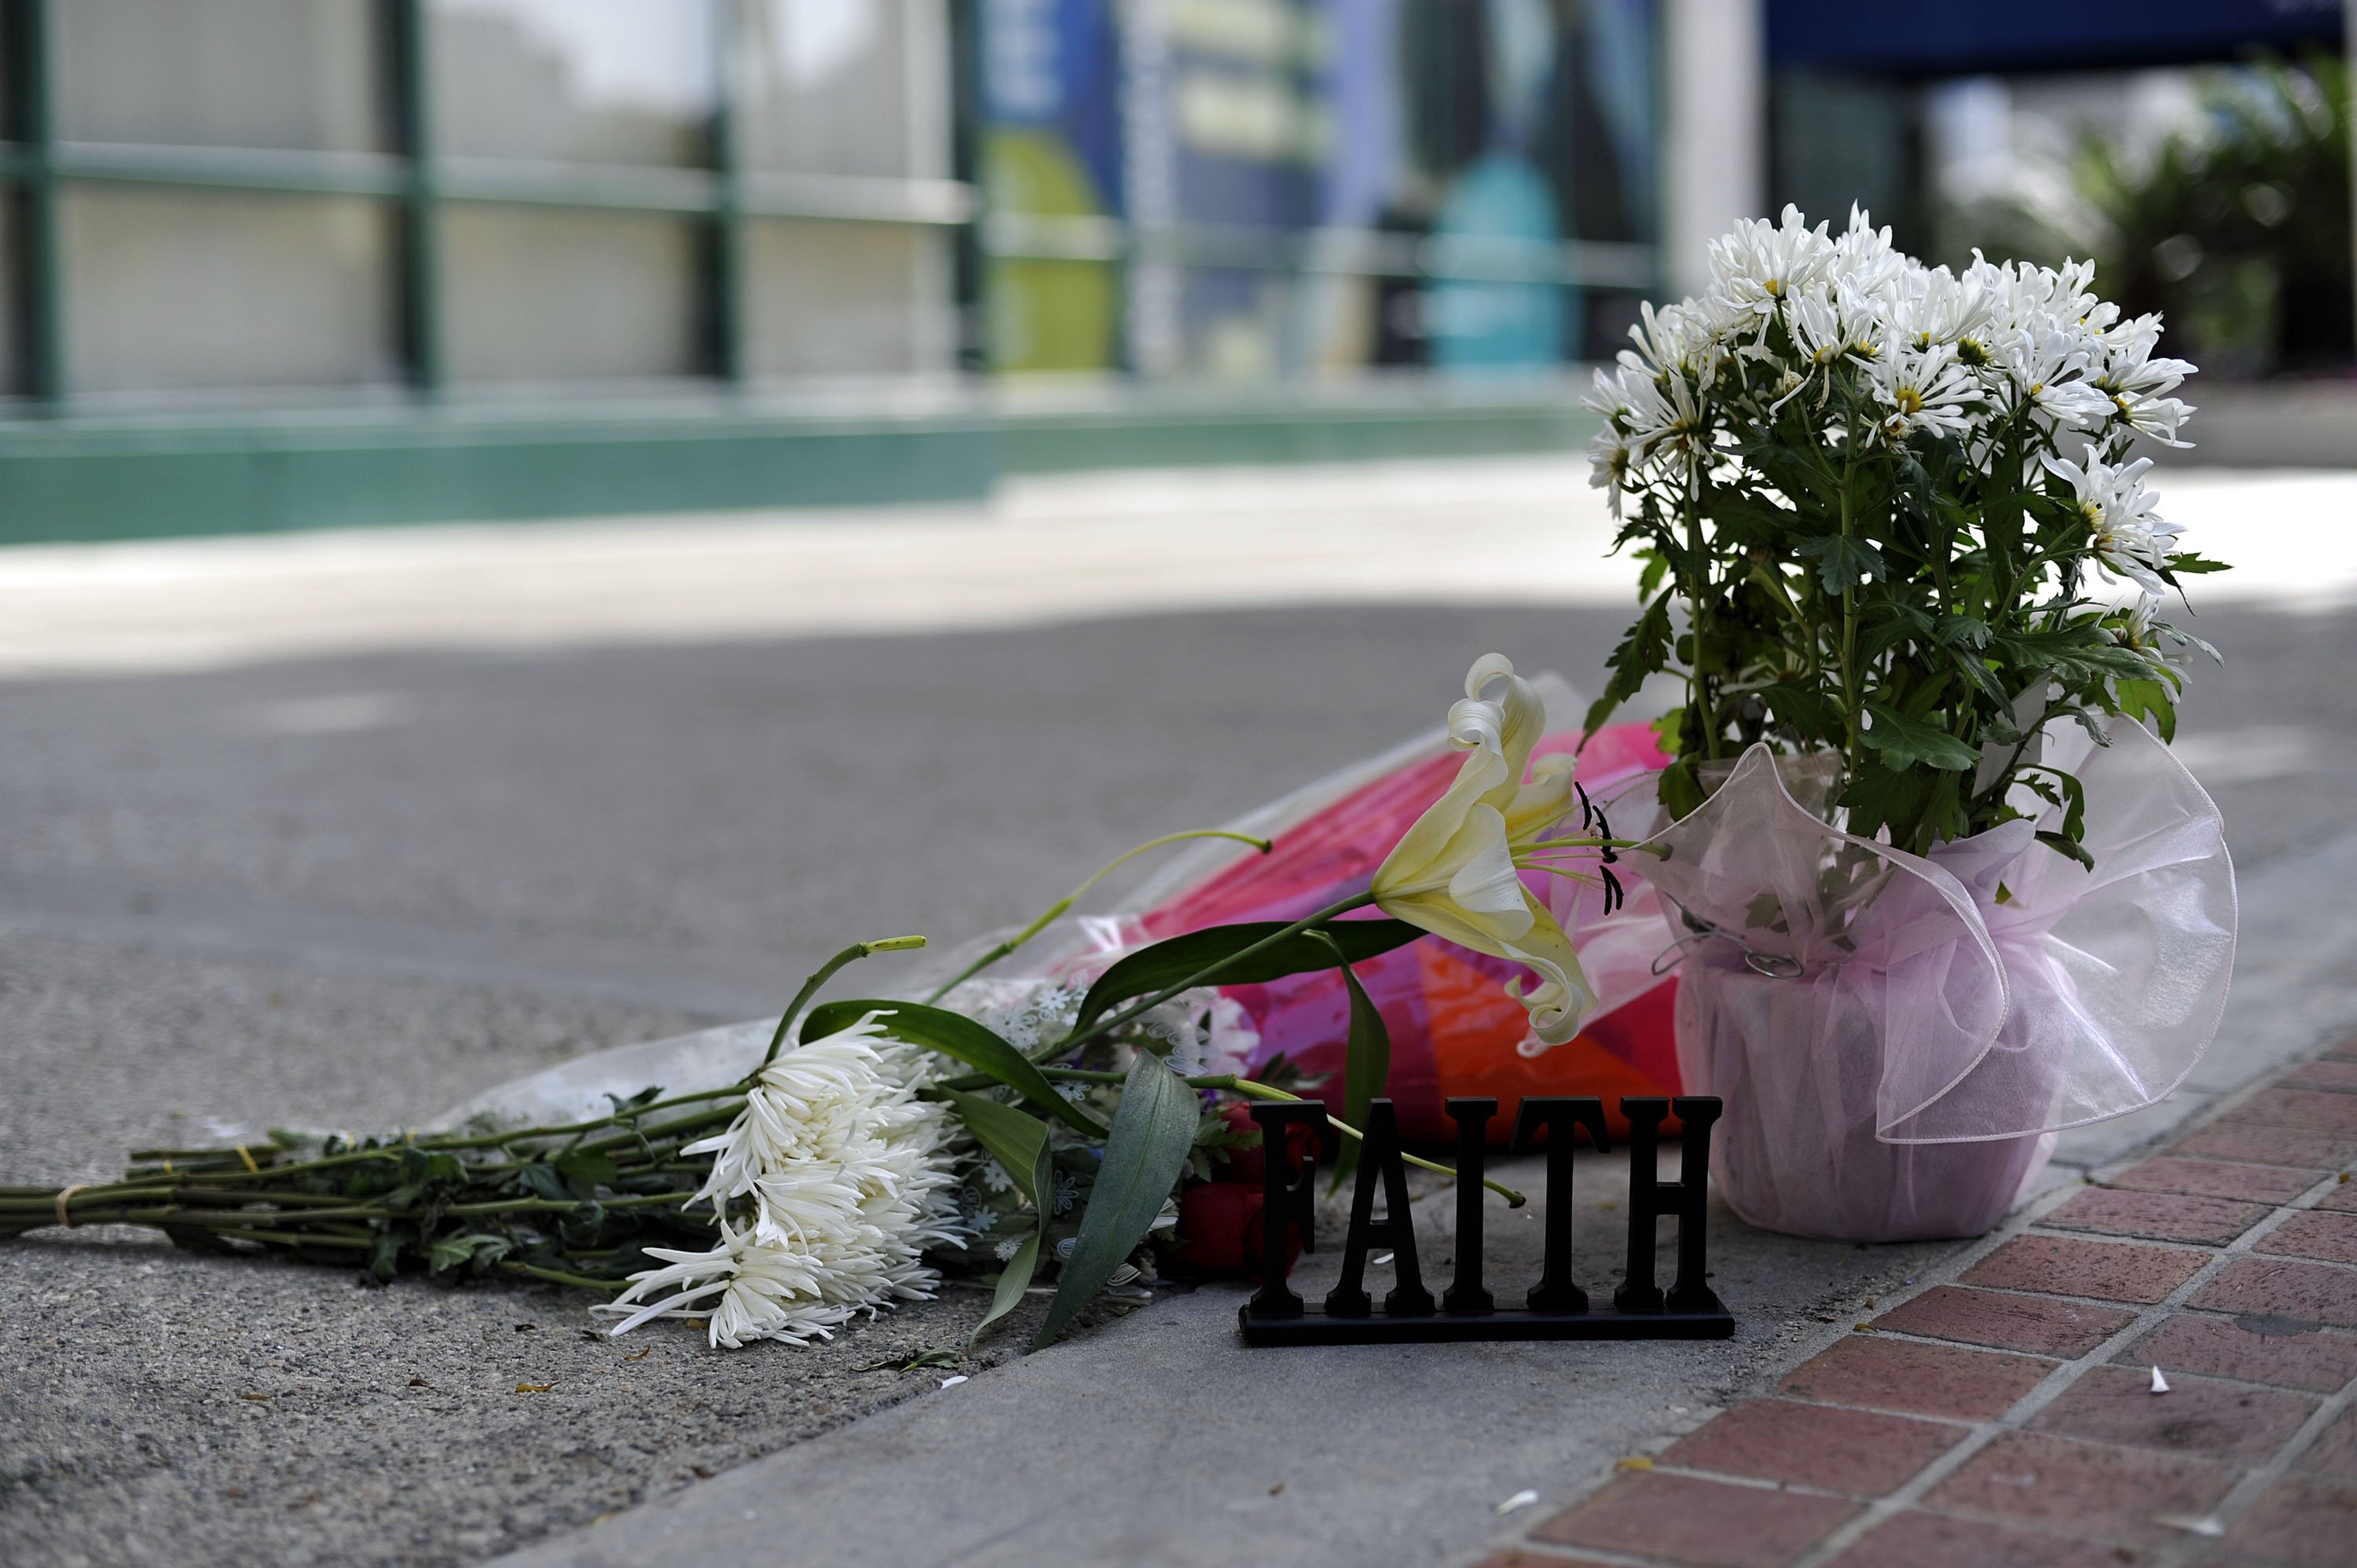 Flowers placed in front of the building at the 900 block of South Flower Street where Michael Blosil committed suicide on February 28, 2010 in Los Angeles, California ┃Source: Getty Images